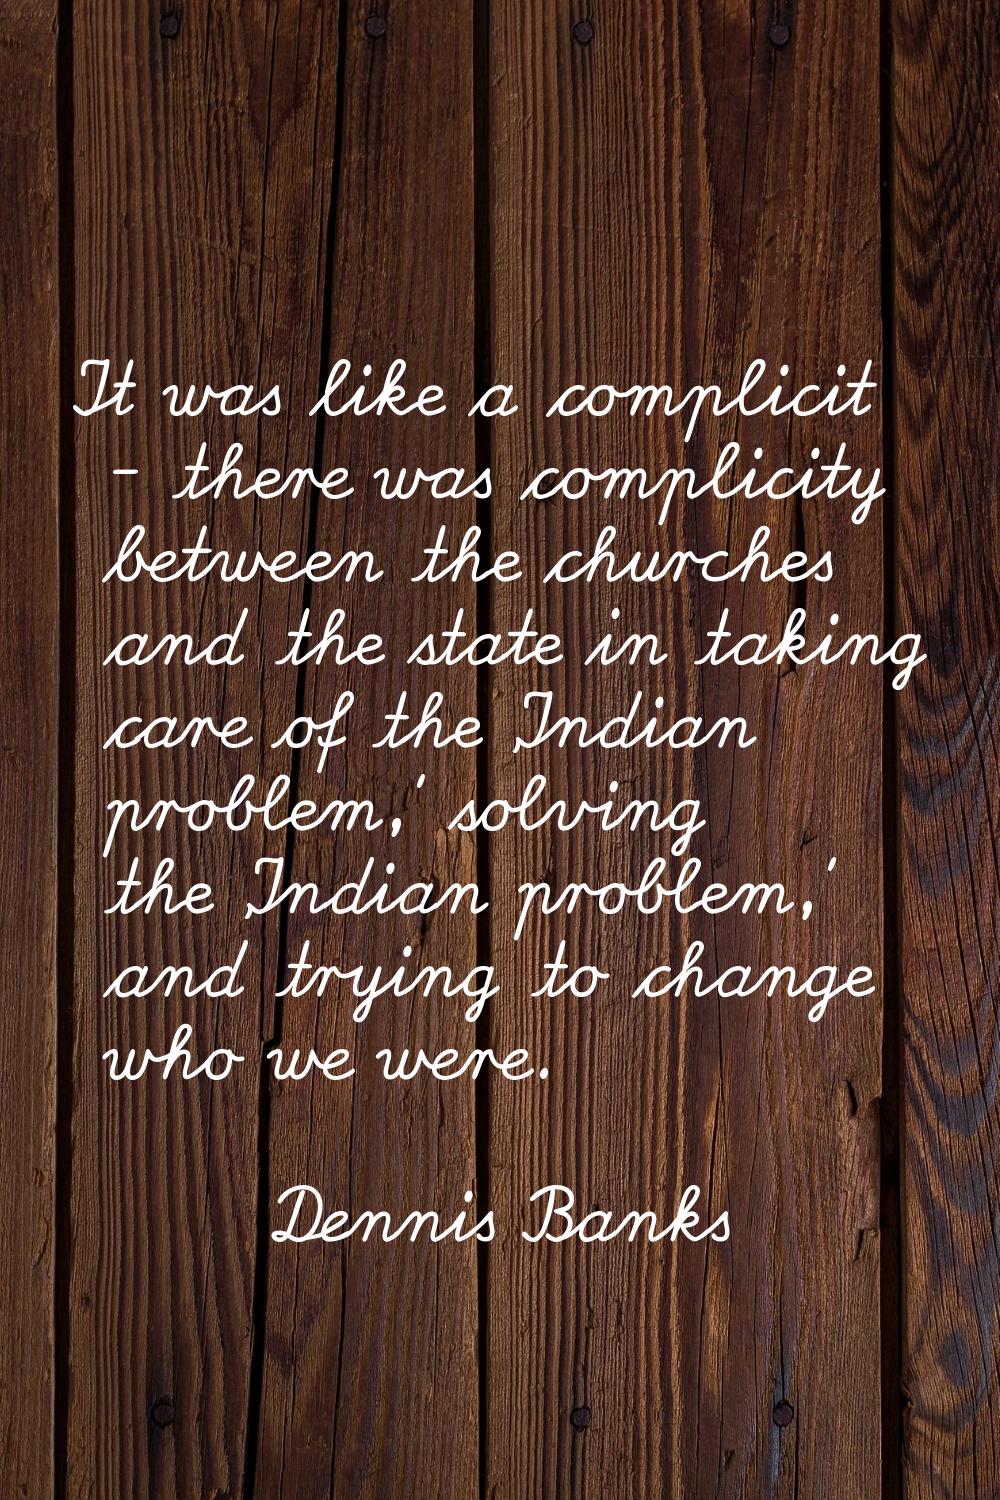 It was like a complicit - there was complicity between the churches and the state in taking care of